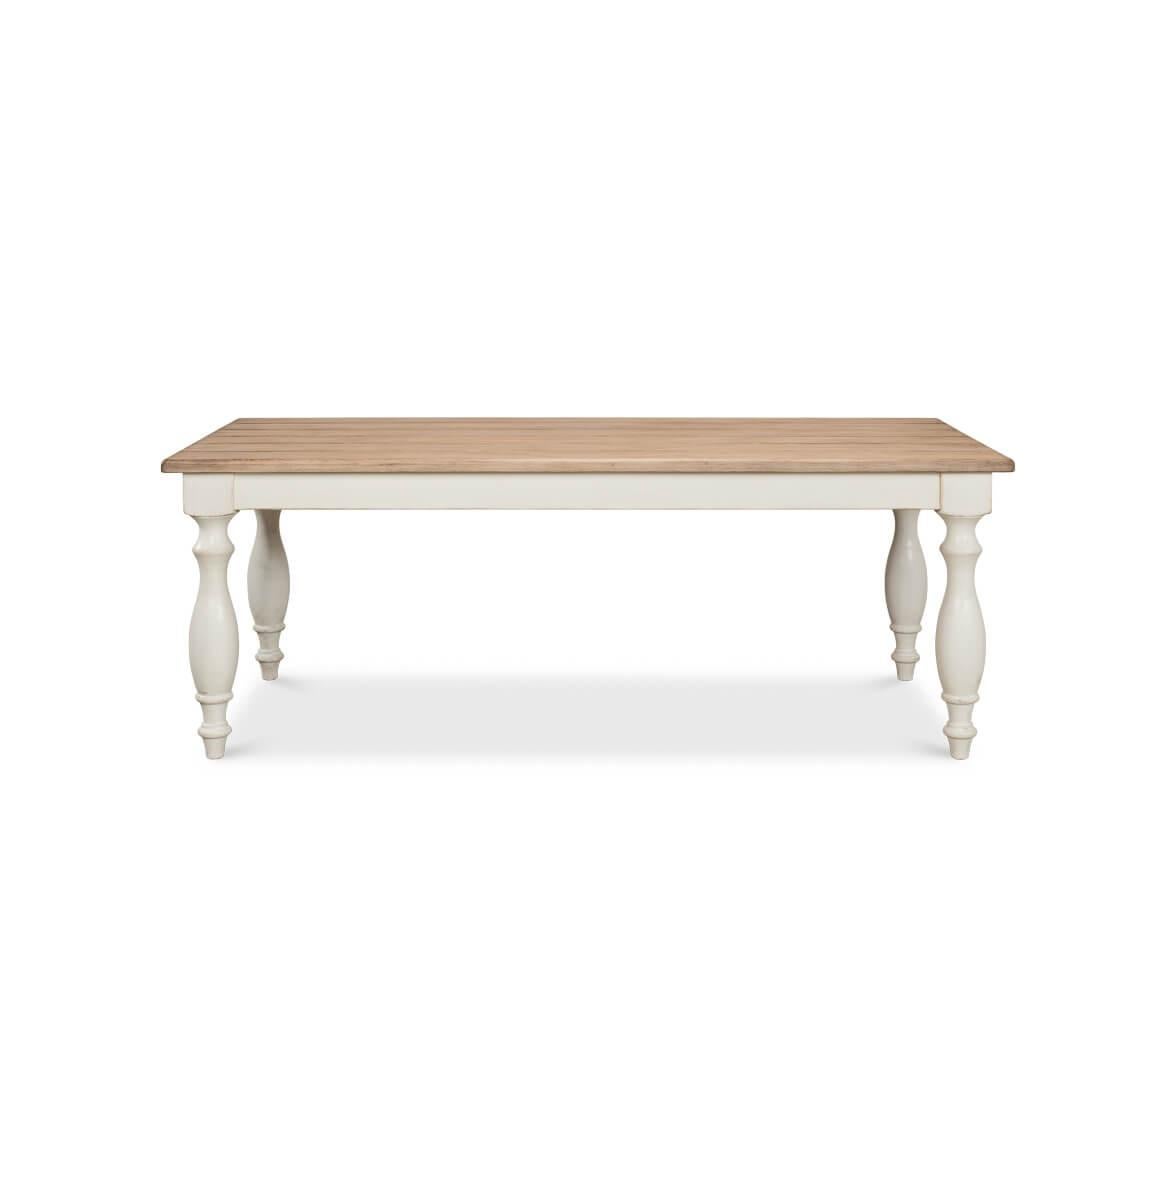 Inspired by the lifestyles of northern France, where families gather around large tables to share meals and make memories, this dining table serves up historical style with great taste. Crafted with care, this table features a natural wood reclaimed